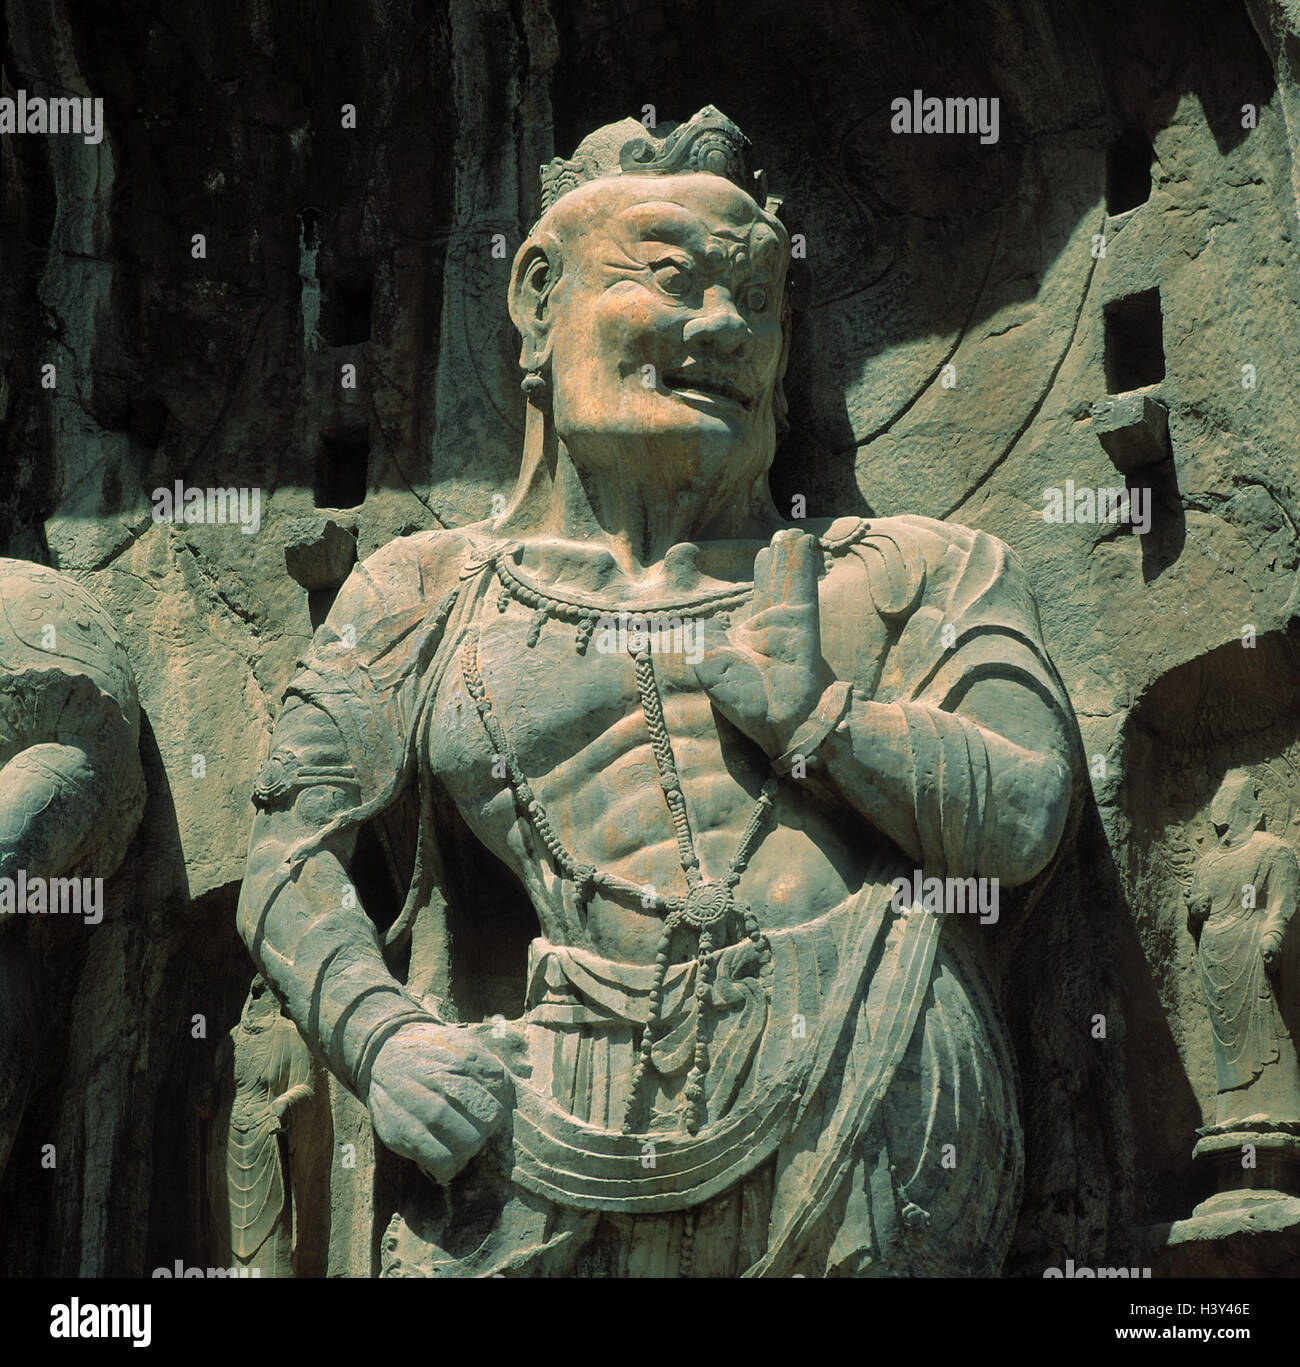 China, Henan, Luoyang, Longmen-grottos, Feng Xian Tempel, Buddha's statue, detail, Lojang, Loyang, statues, Buddha, place of interest, seaweed dynasty, faith, religion, Buddhism, outside, places interest, Stock Photo